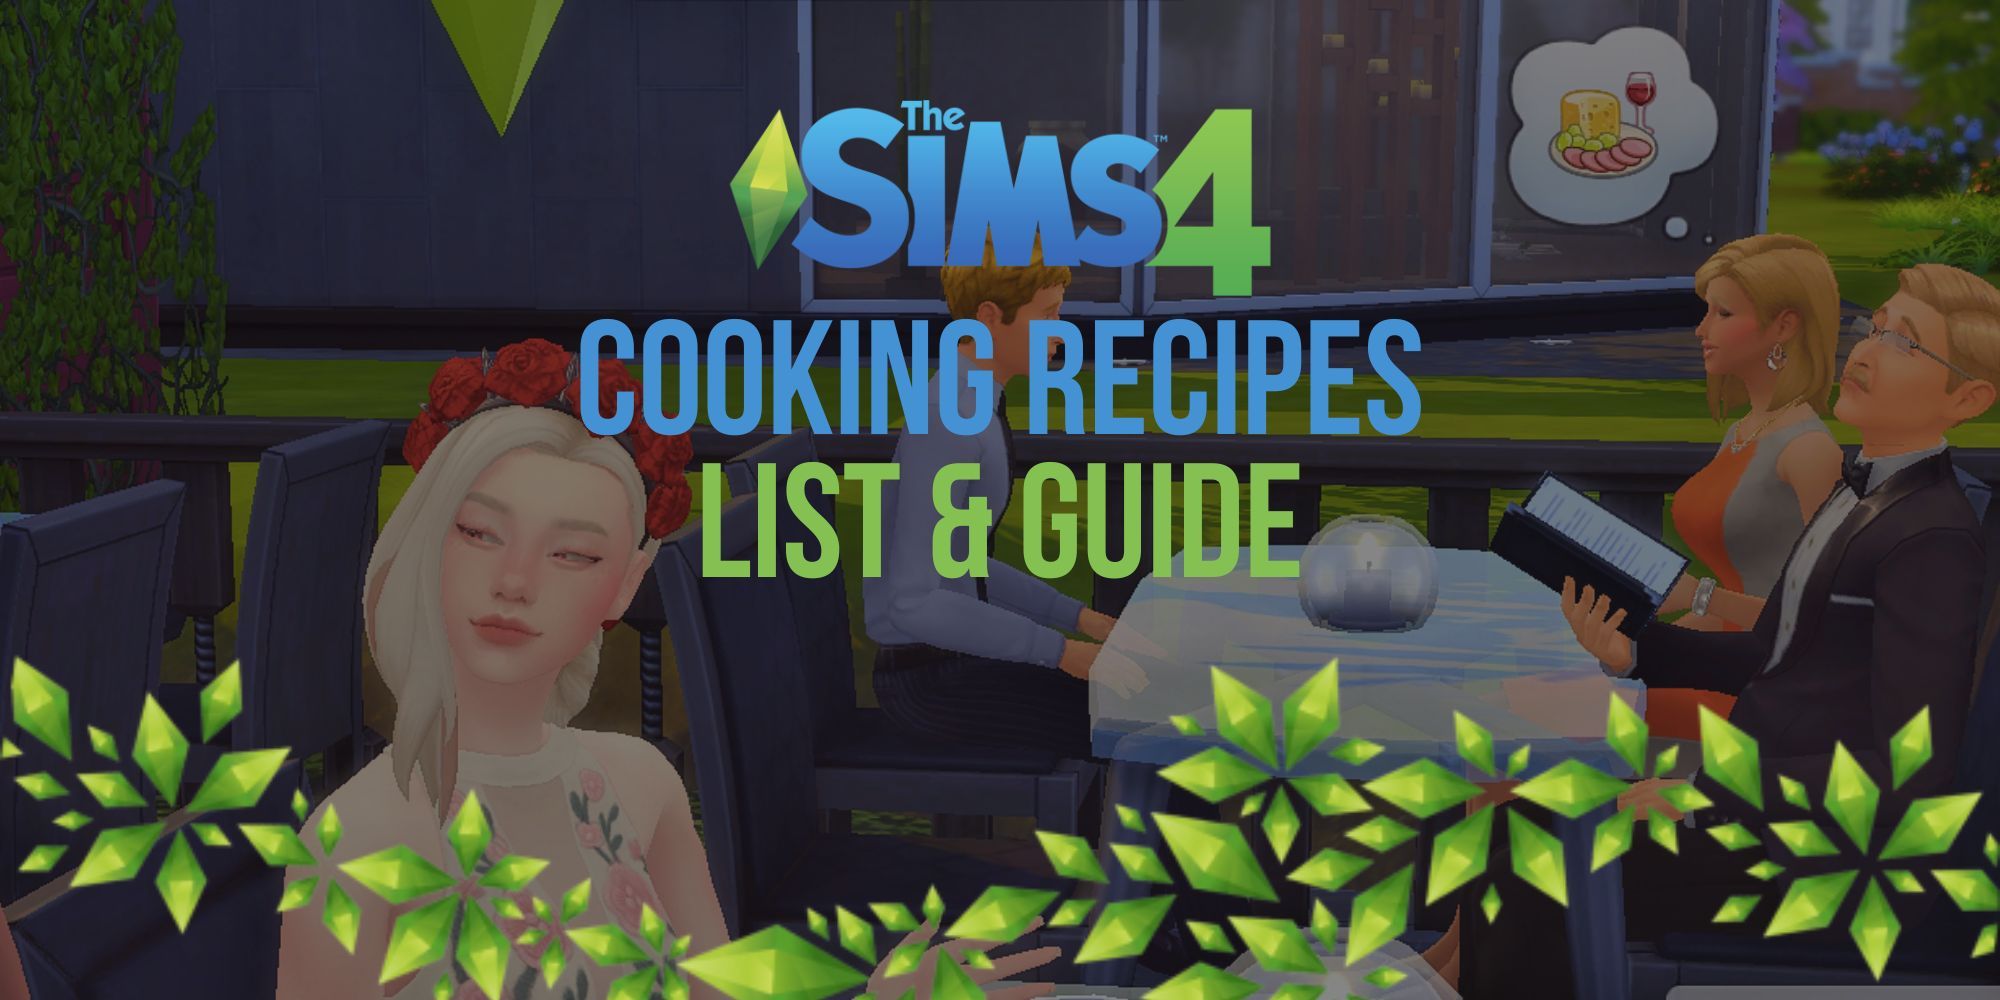 The Sims 4: Cooking Recipes Guide